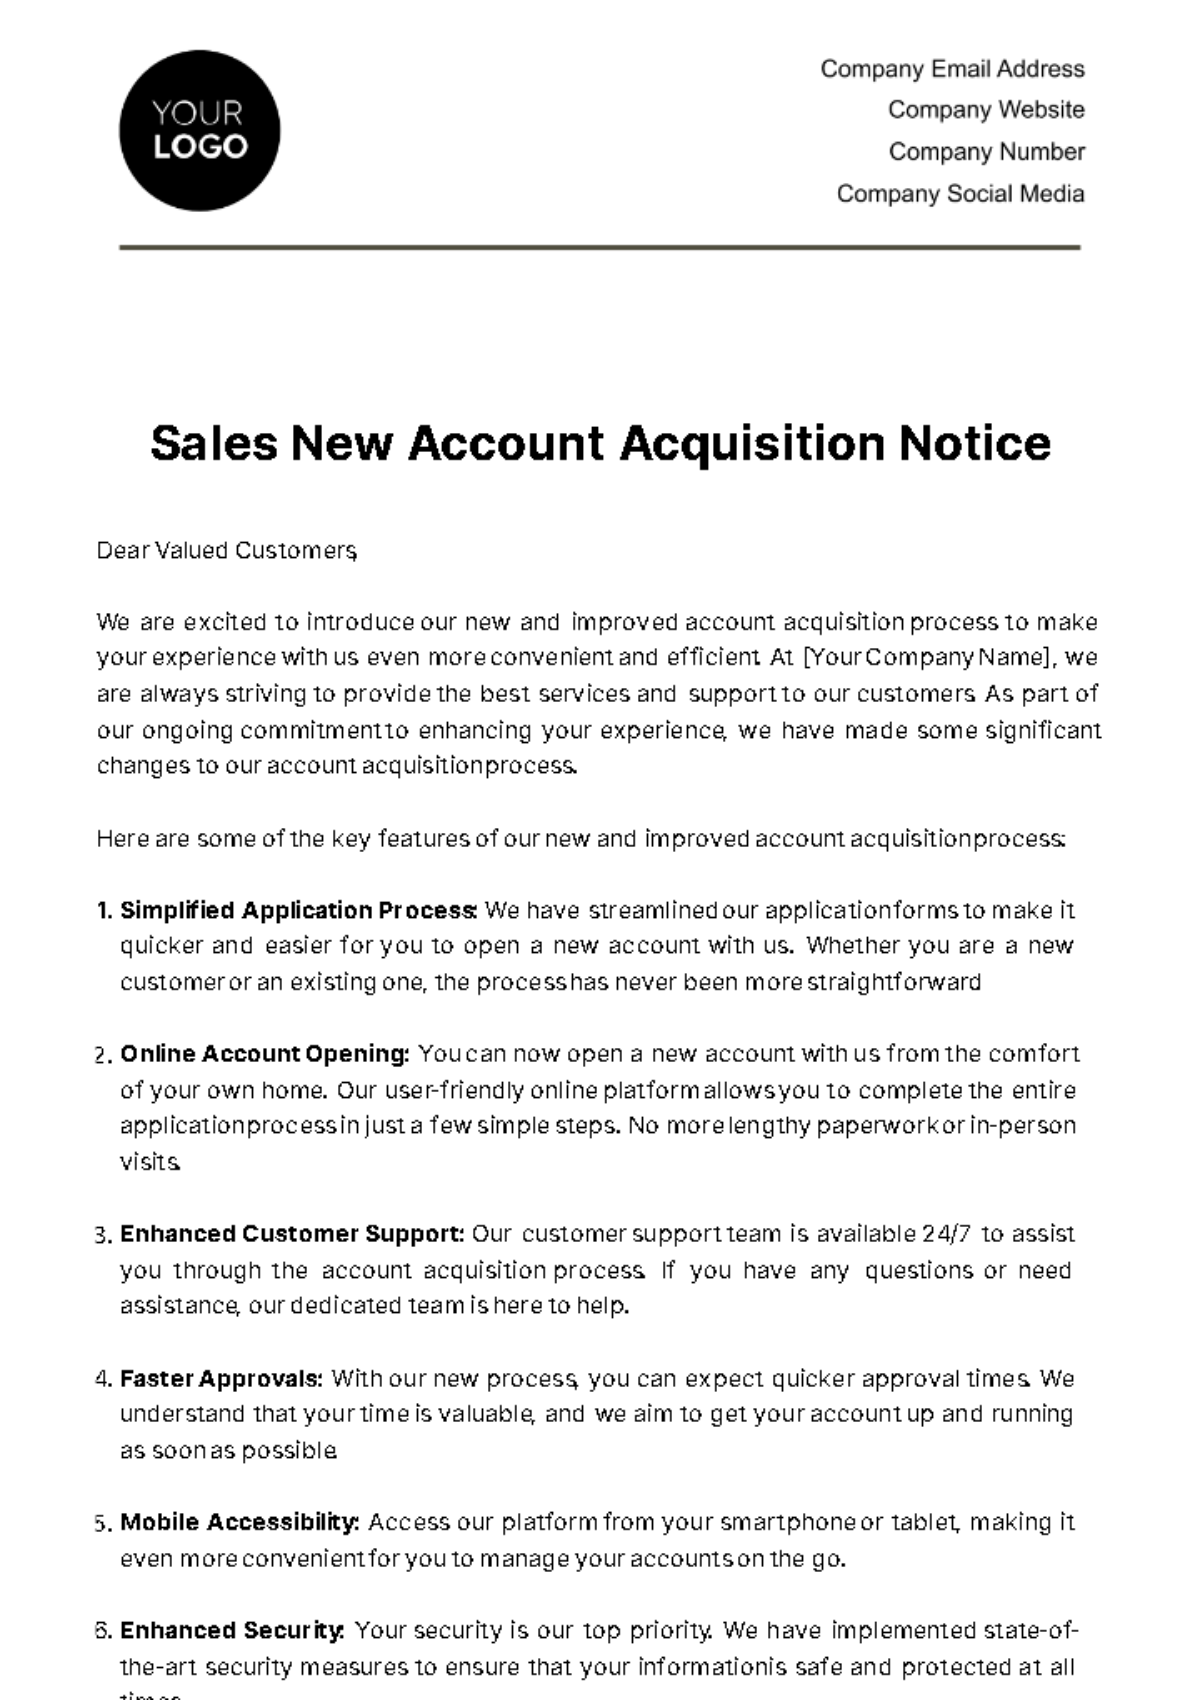 Sales New Account Acquisition Notice Template